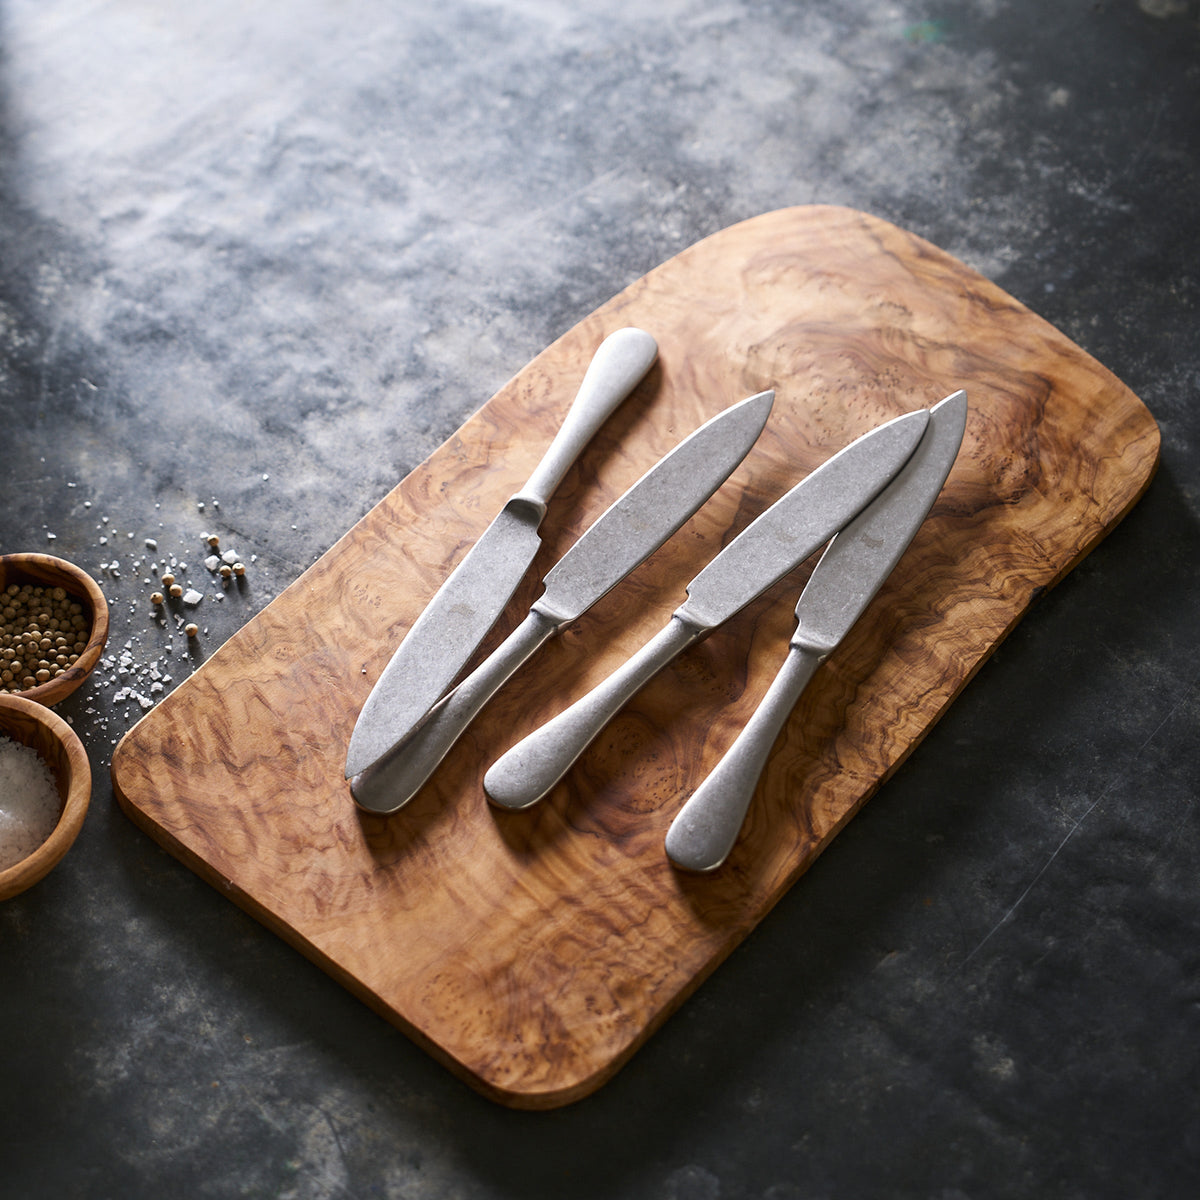 Four Mepra Pewter Set/4 Steak Knives with a stonewashed finish on a wooden cutting board.